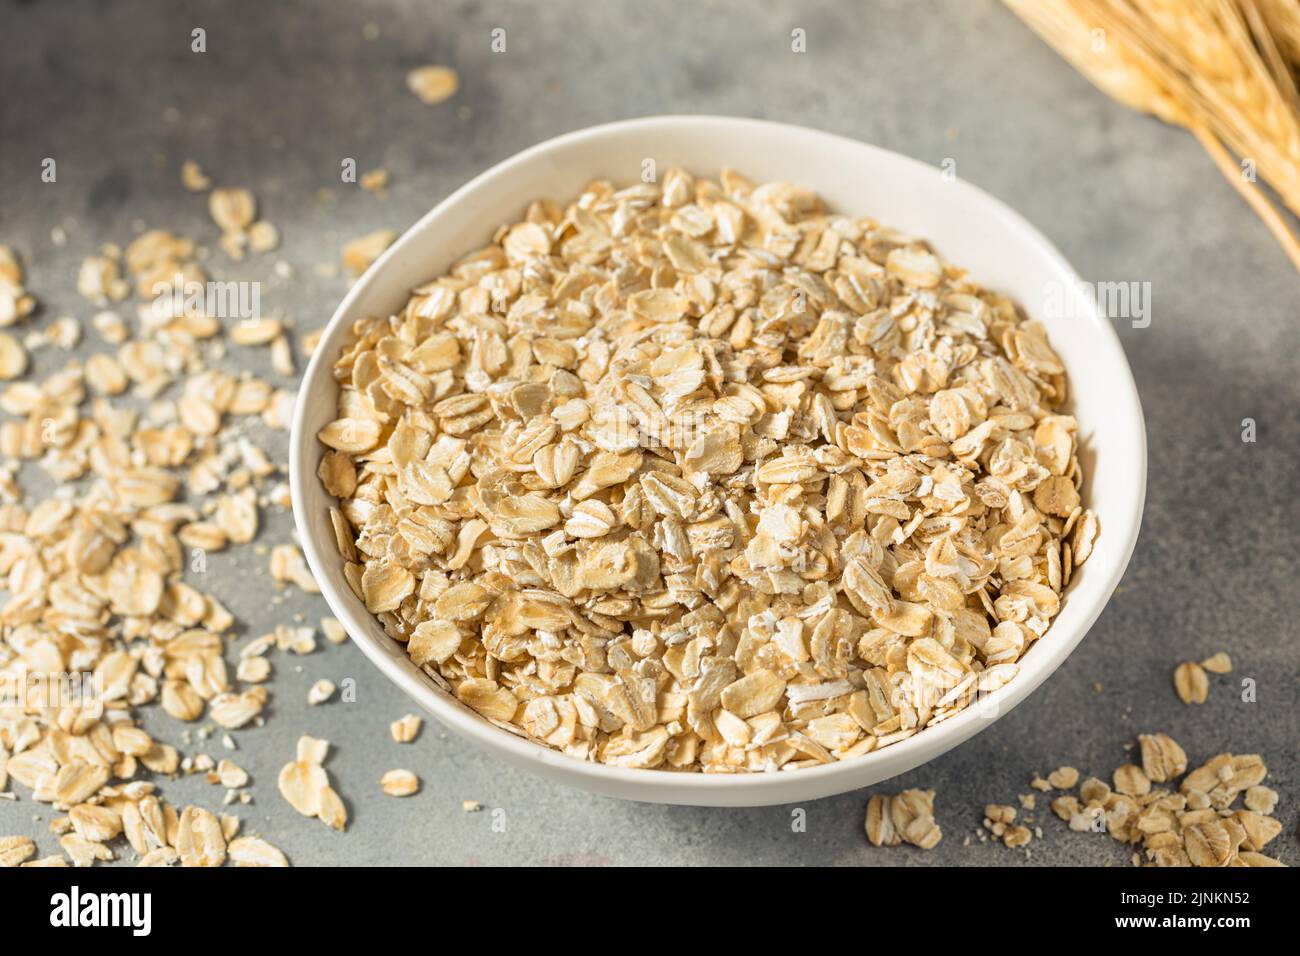 Dry Organic Rolled Oats Oatmeal in a Bowl Stock Photo